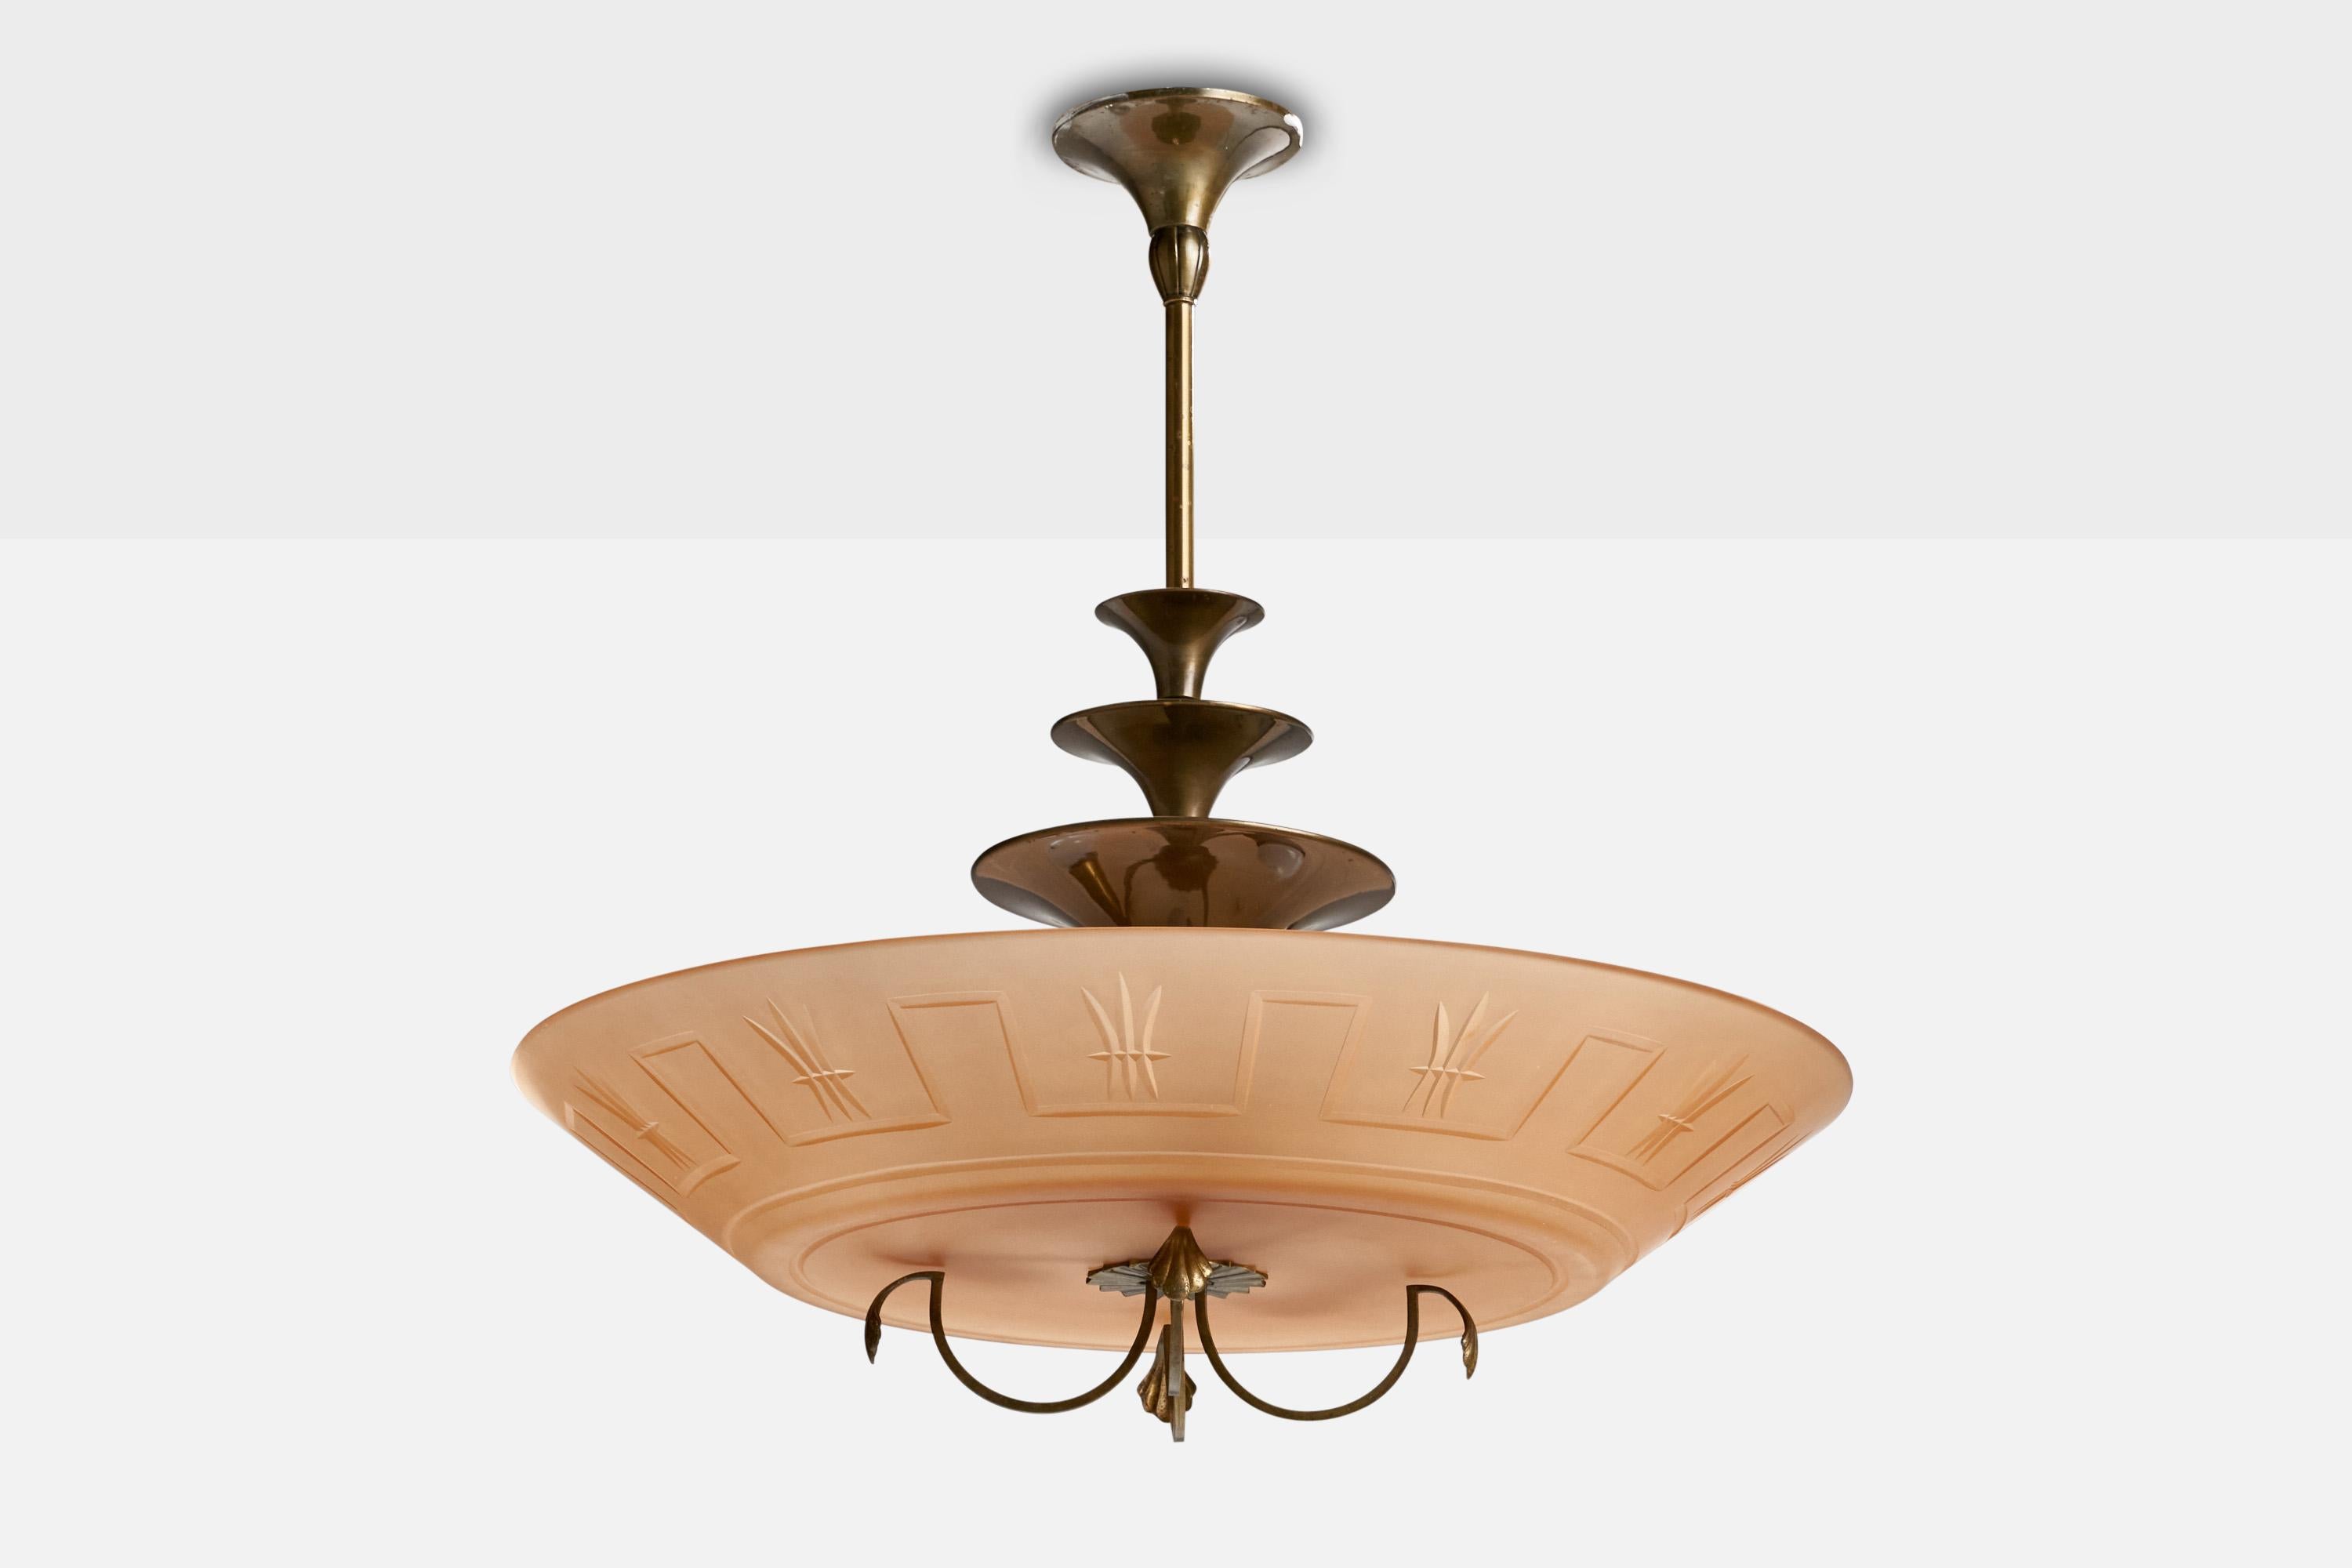 A brass and orange glass pendant light designed and produced in Sweden, 1930s.

Dimensions of canopy (inches): 2.” H x 4.44” Diameter
Socket takes standard E-26 bulbs. 3 socket.There is no maximum wattage stated on the fixture. All lighting will be